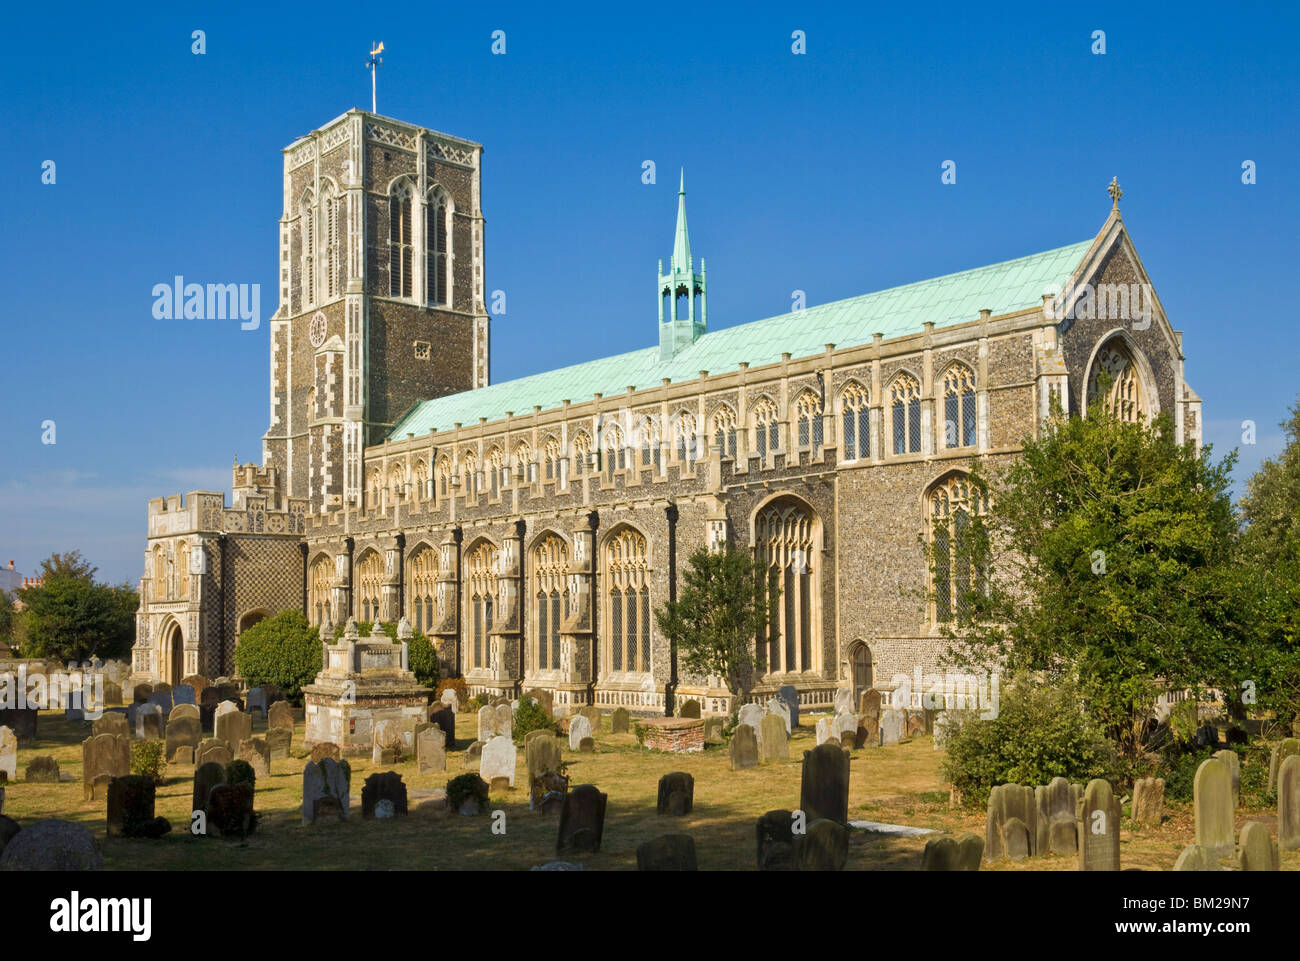 St. Edmund King and Martyr church and graveyard, Southwold, Suffolk, UK Stock Photo